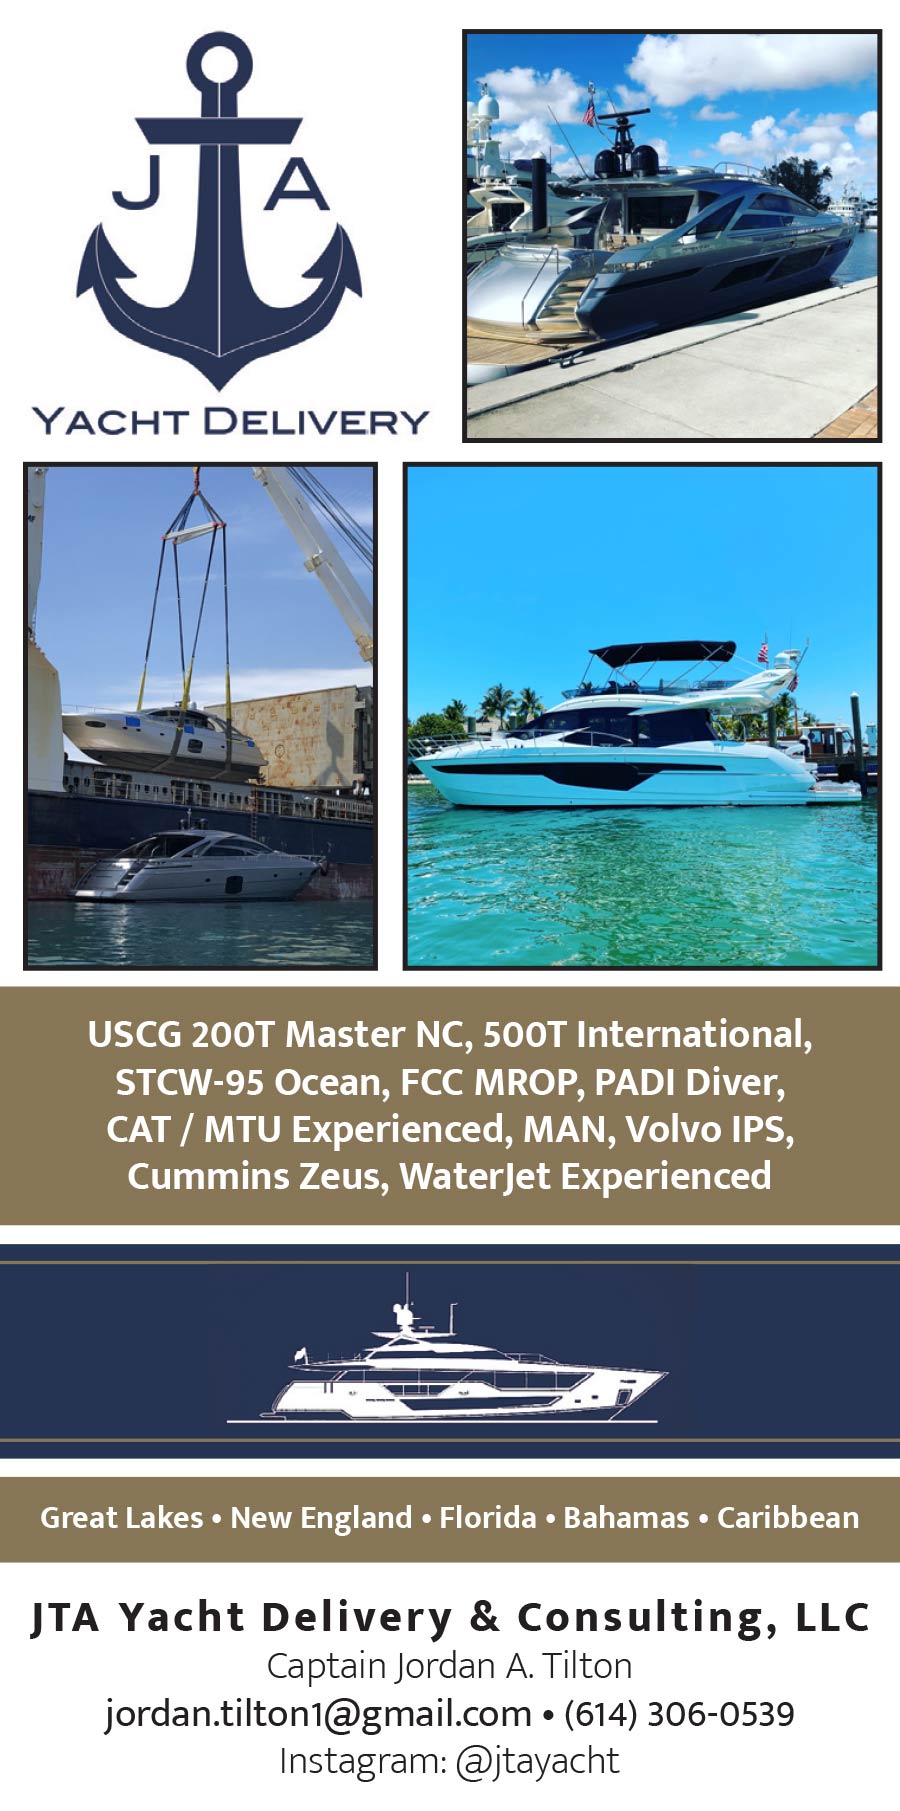 JTA Yacht Delivery & Consulting, LLC Advertisement